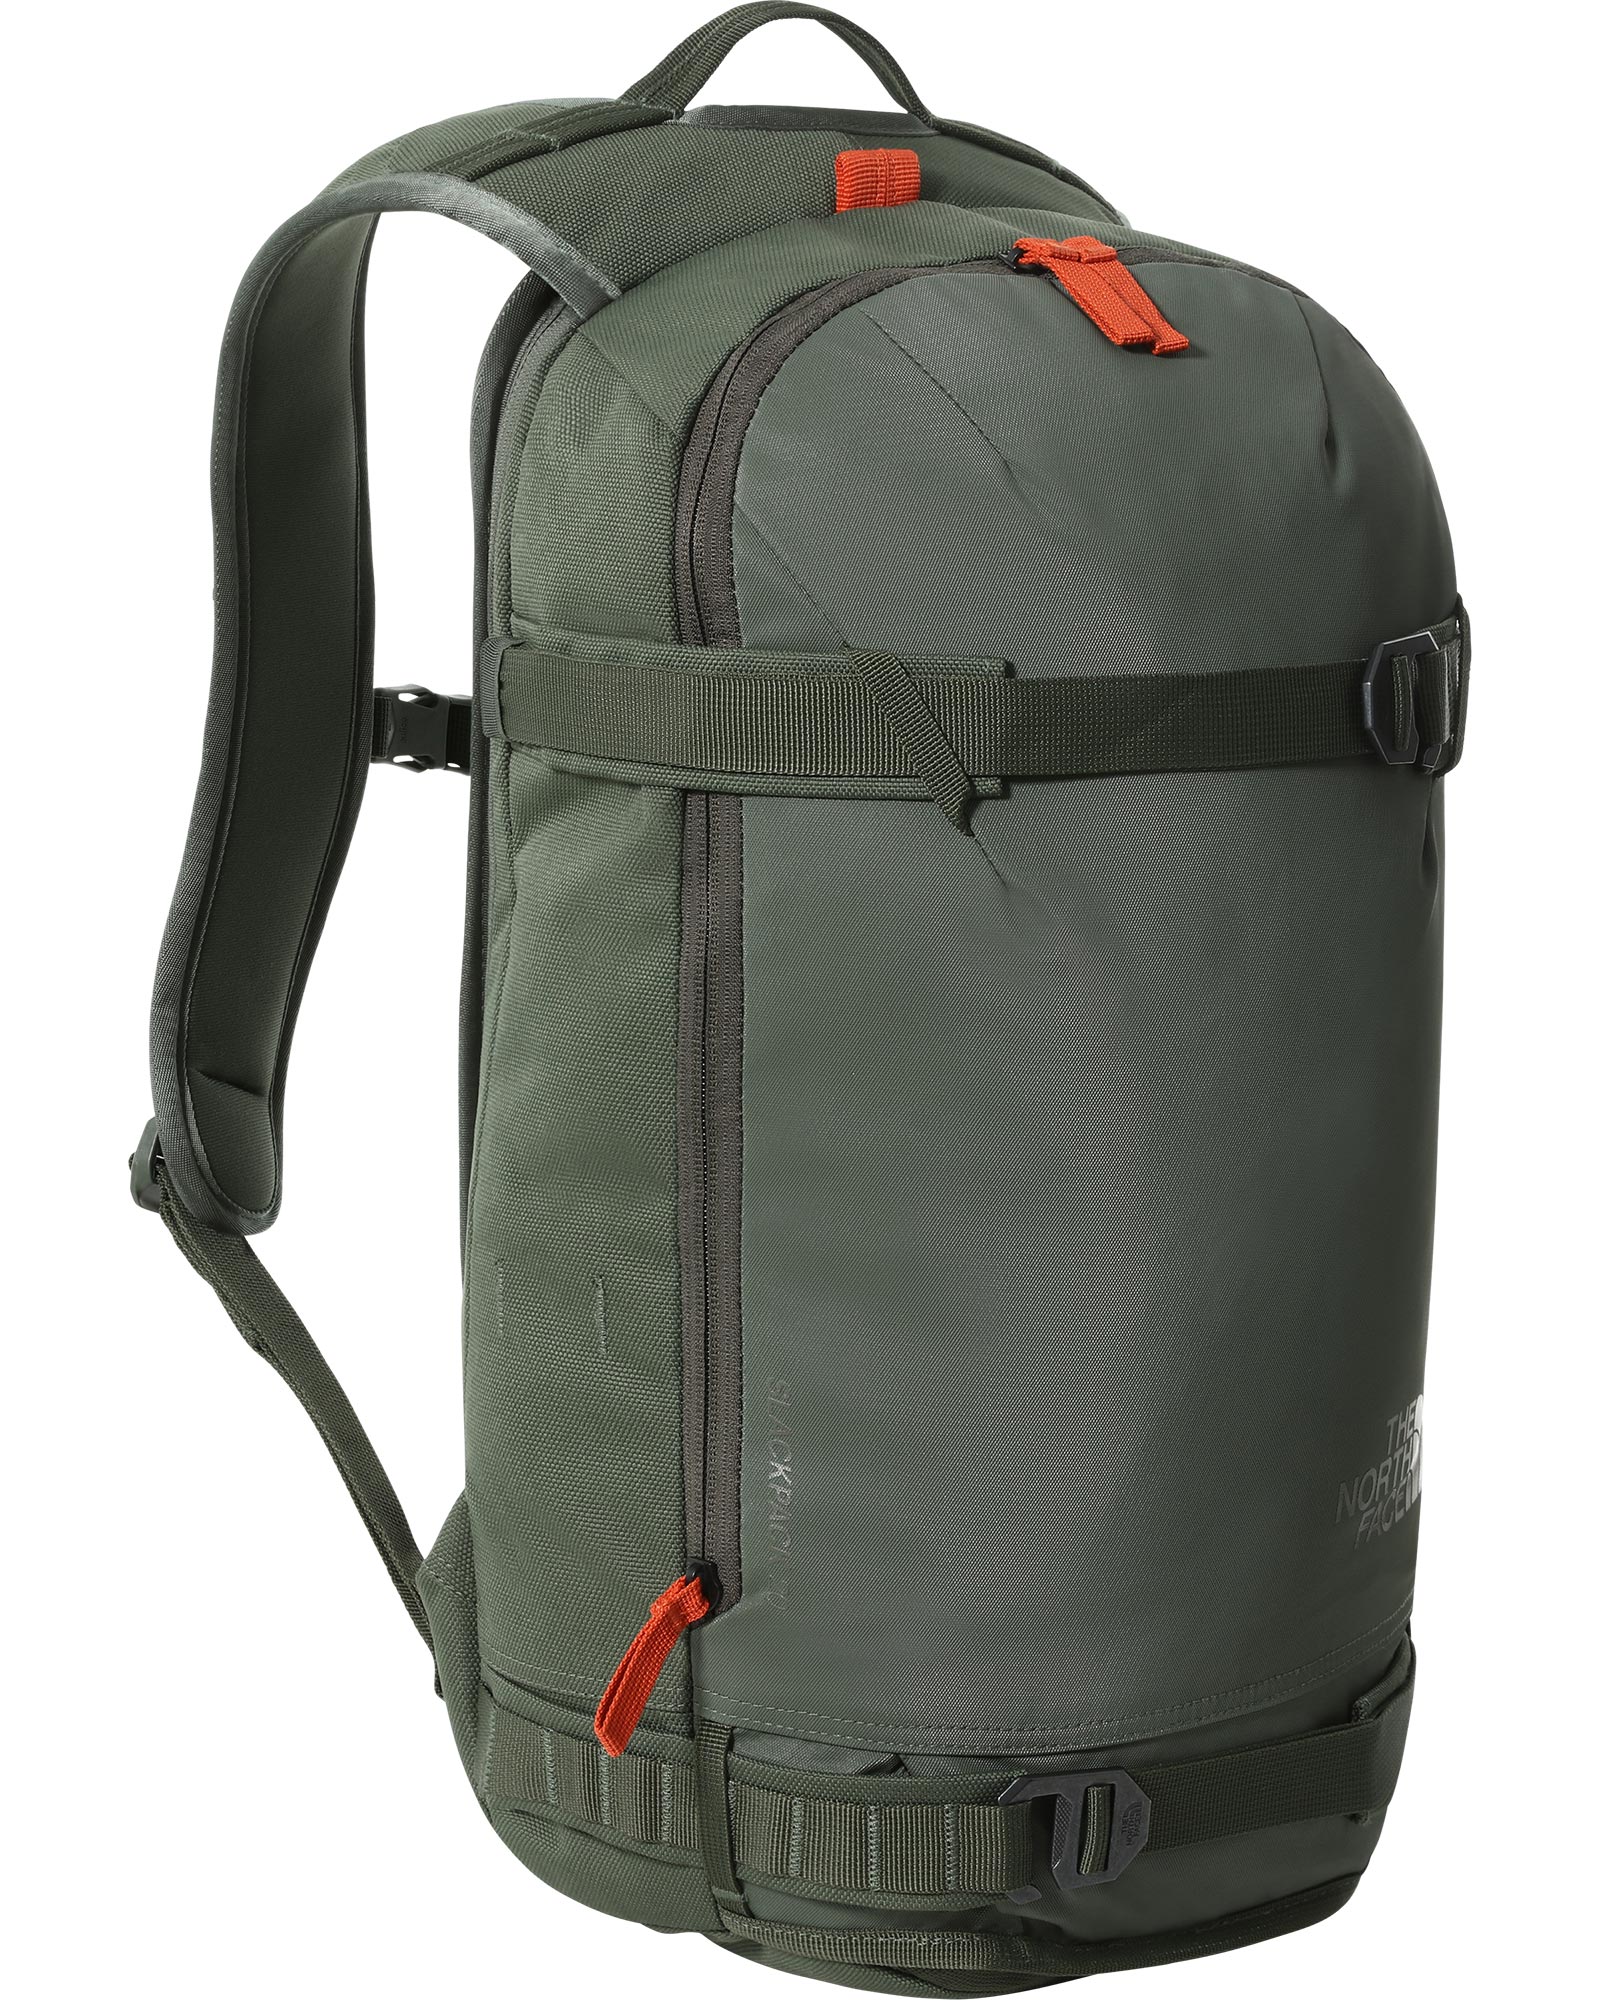 The North Face Slackpack 2.0 Expedition Backpack